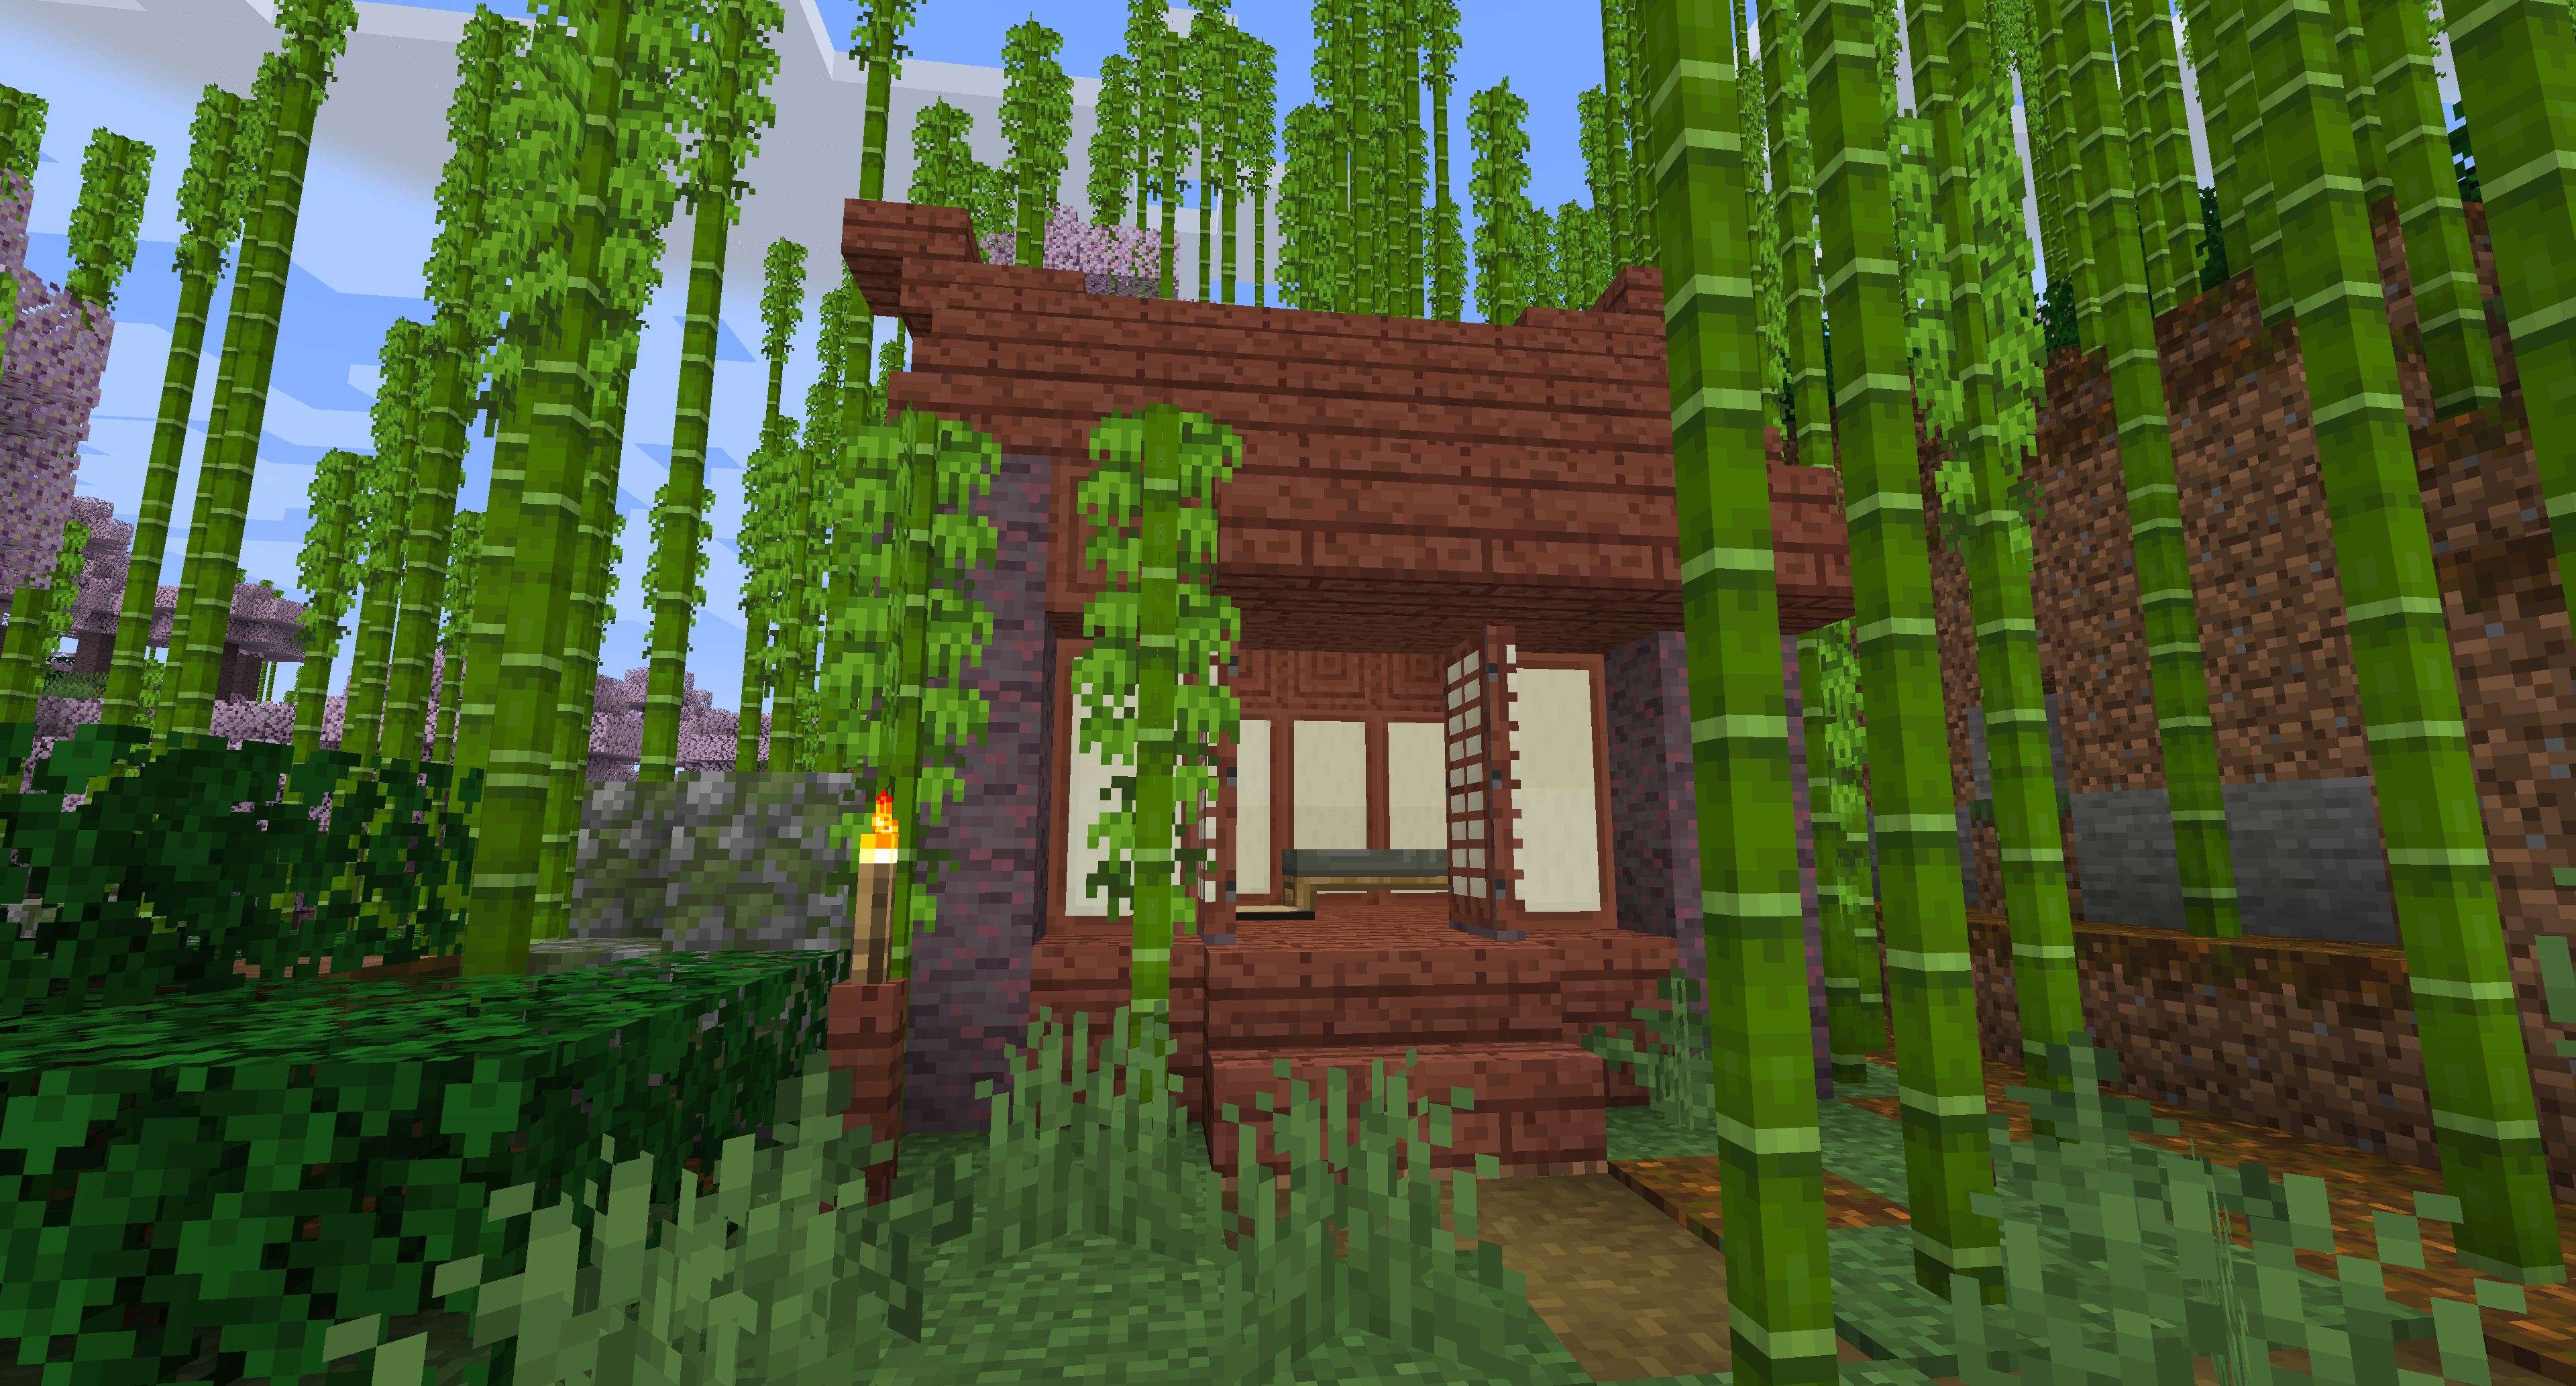 House in bamboo